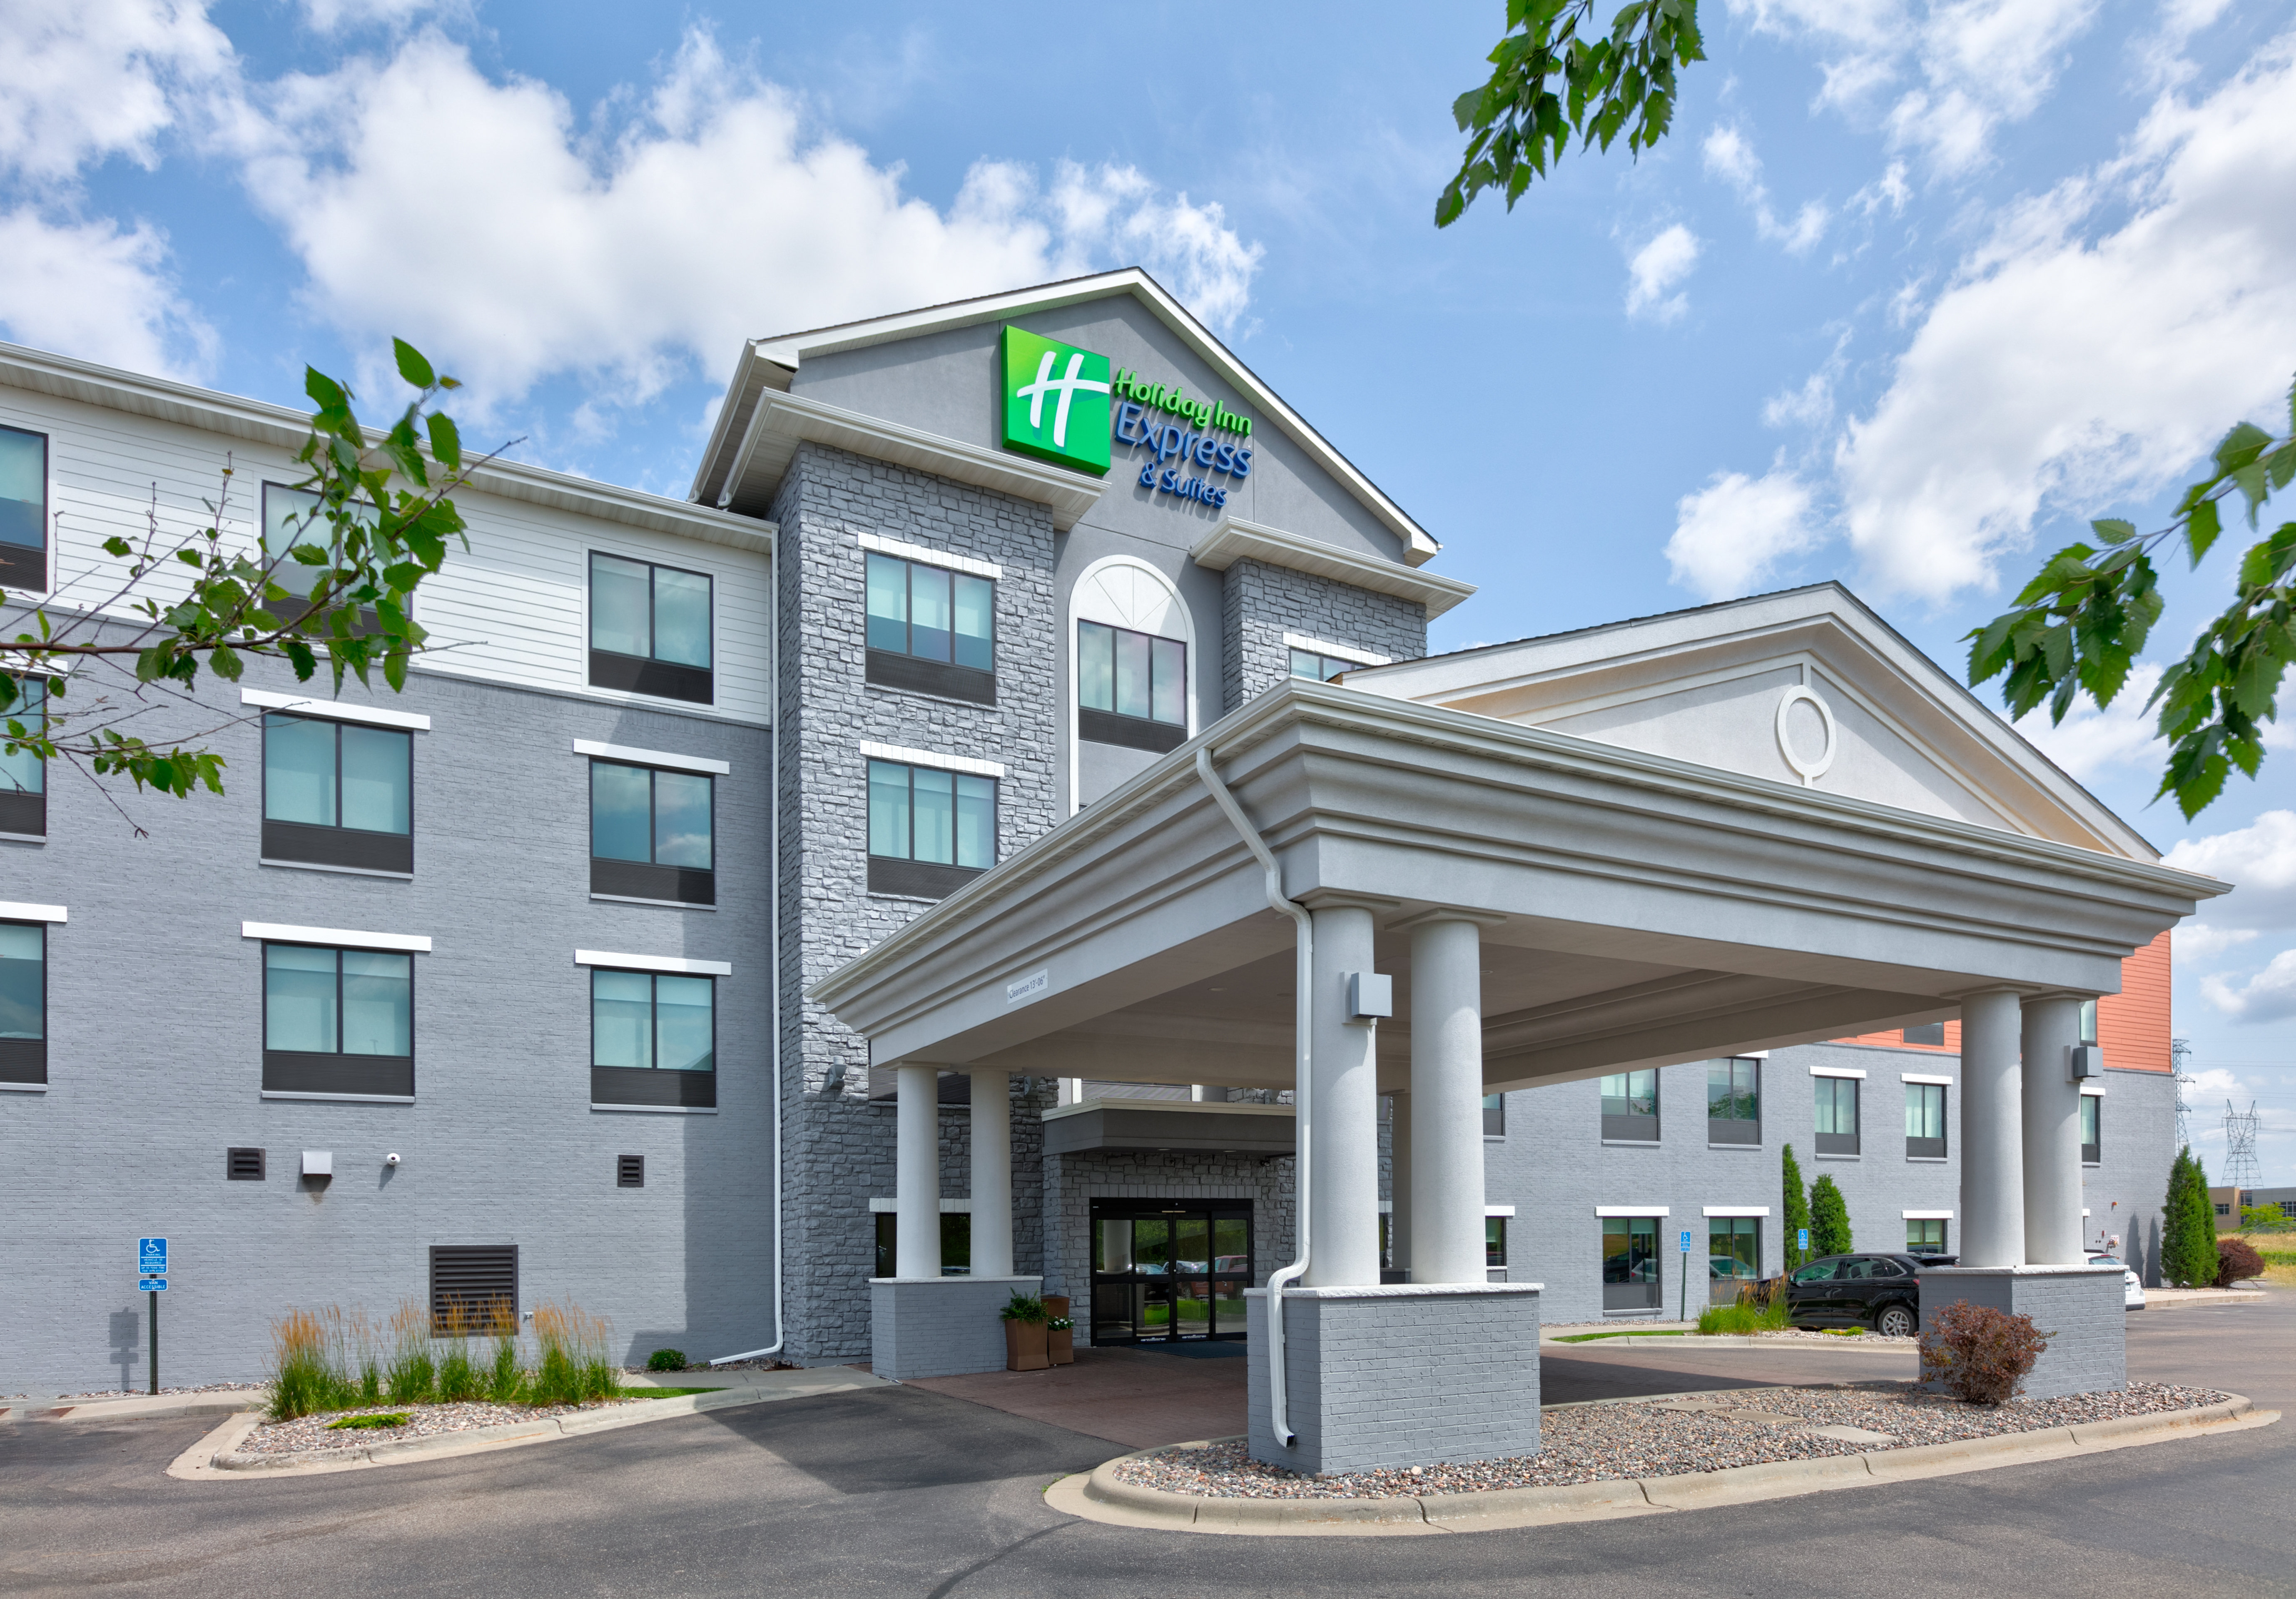 Welcome to the Holiday Inn Express and Suites, Shakopee, MN